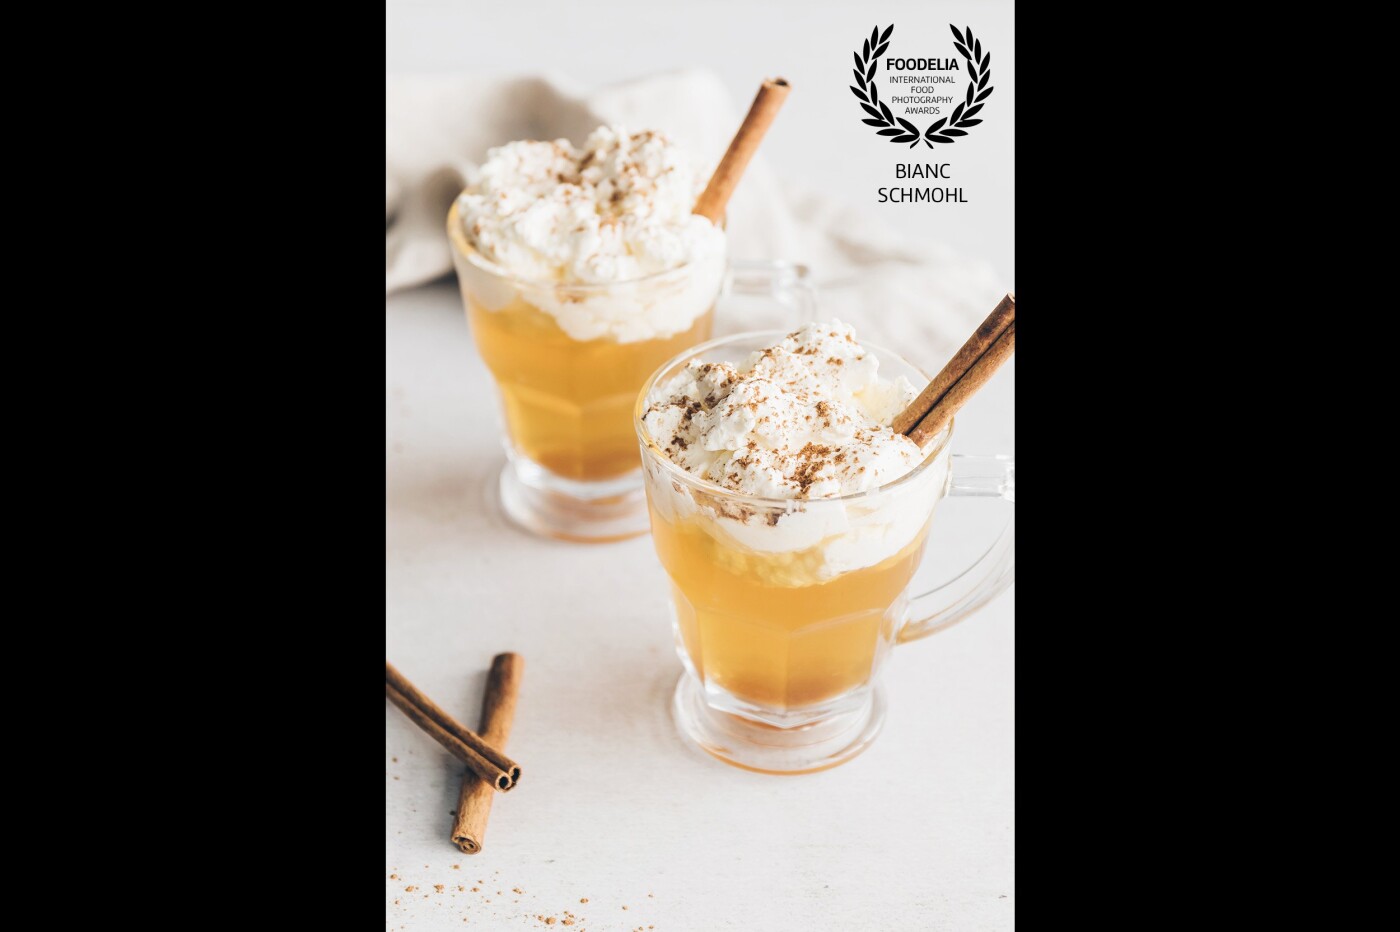 This warm winter drink is a great alternative for those who do not love 'glühwein'. A mix of warm apple juice and Spanish fruit liquor. Topped with cinnamon and whipped cream; get your camara out and enjoy!